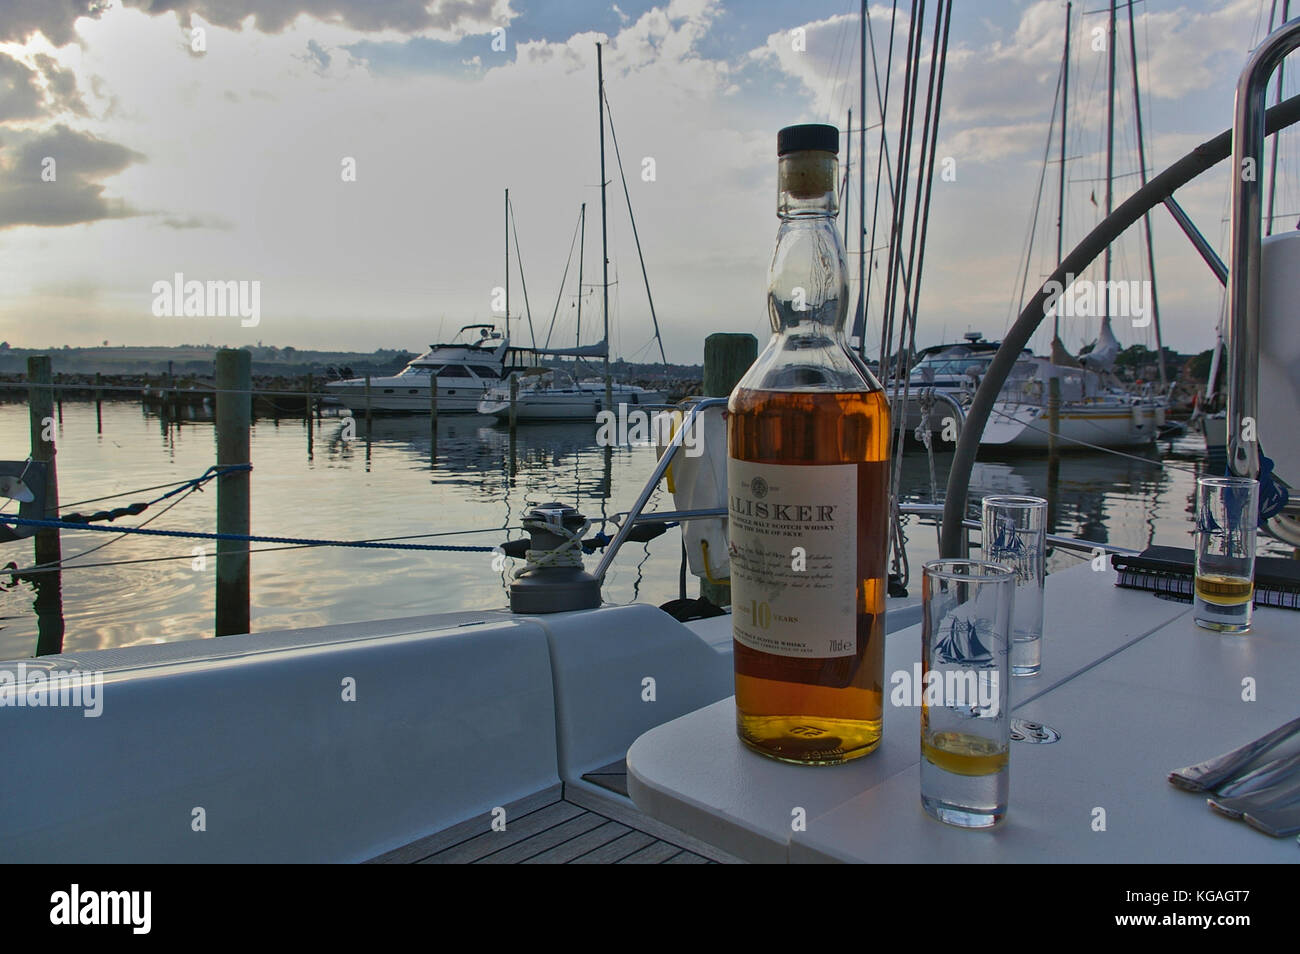 Sonderborg, Denmark - June 30th, 2012 - Bottle of single malt whisky with glasses on the table in the cockpit of a sailing yacht with a marina in the  Stock Photo